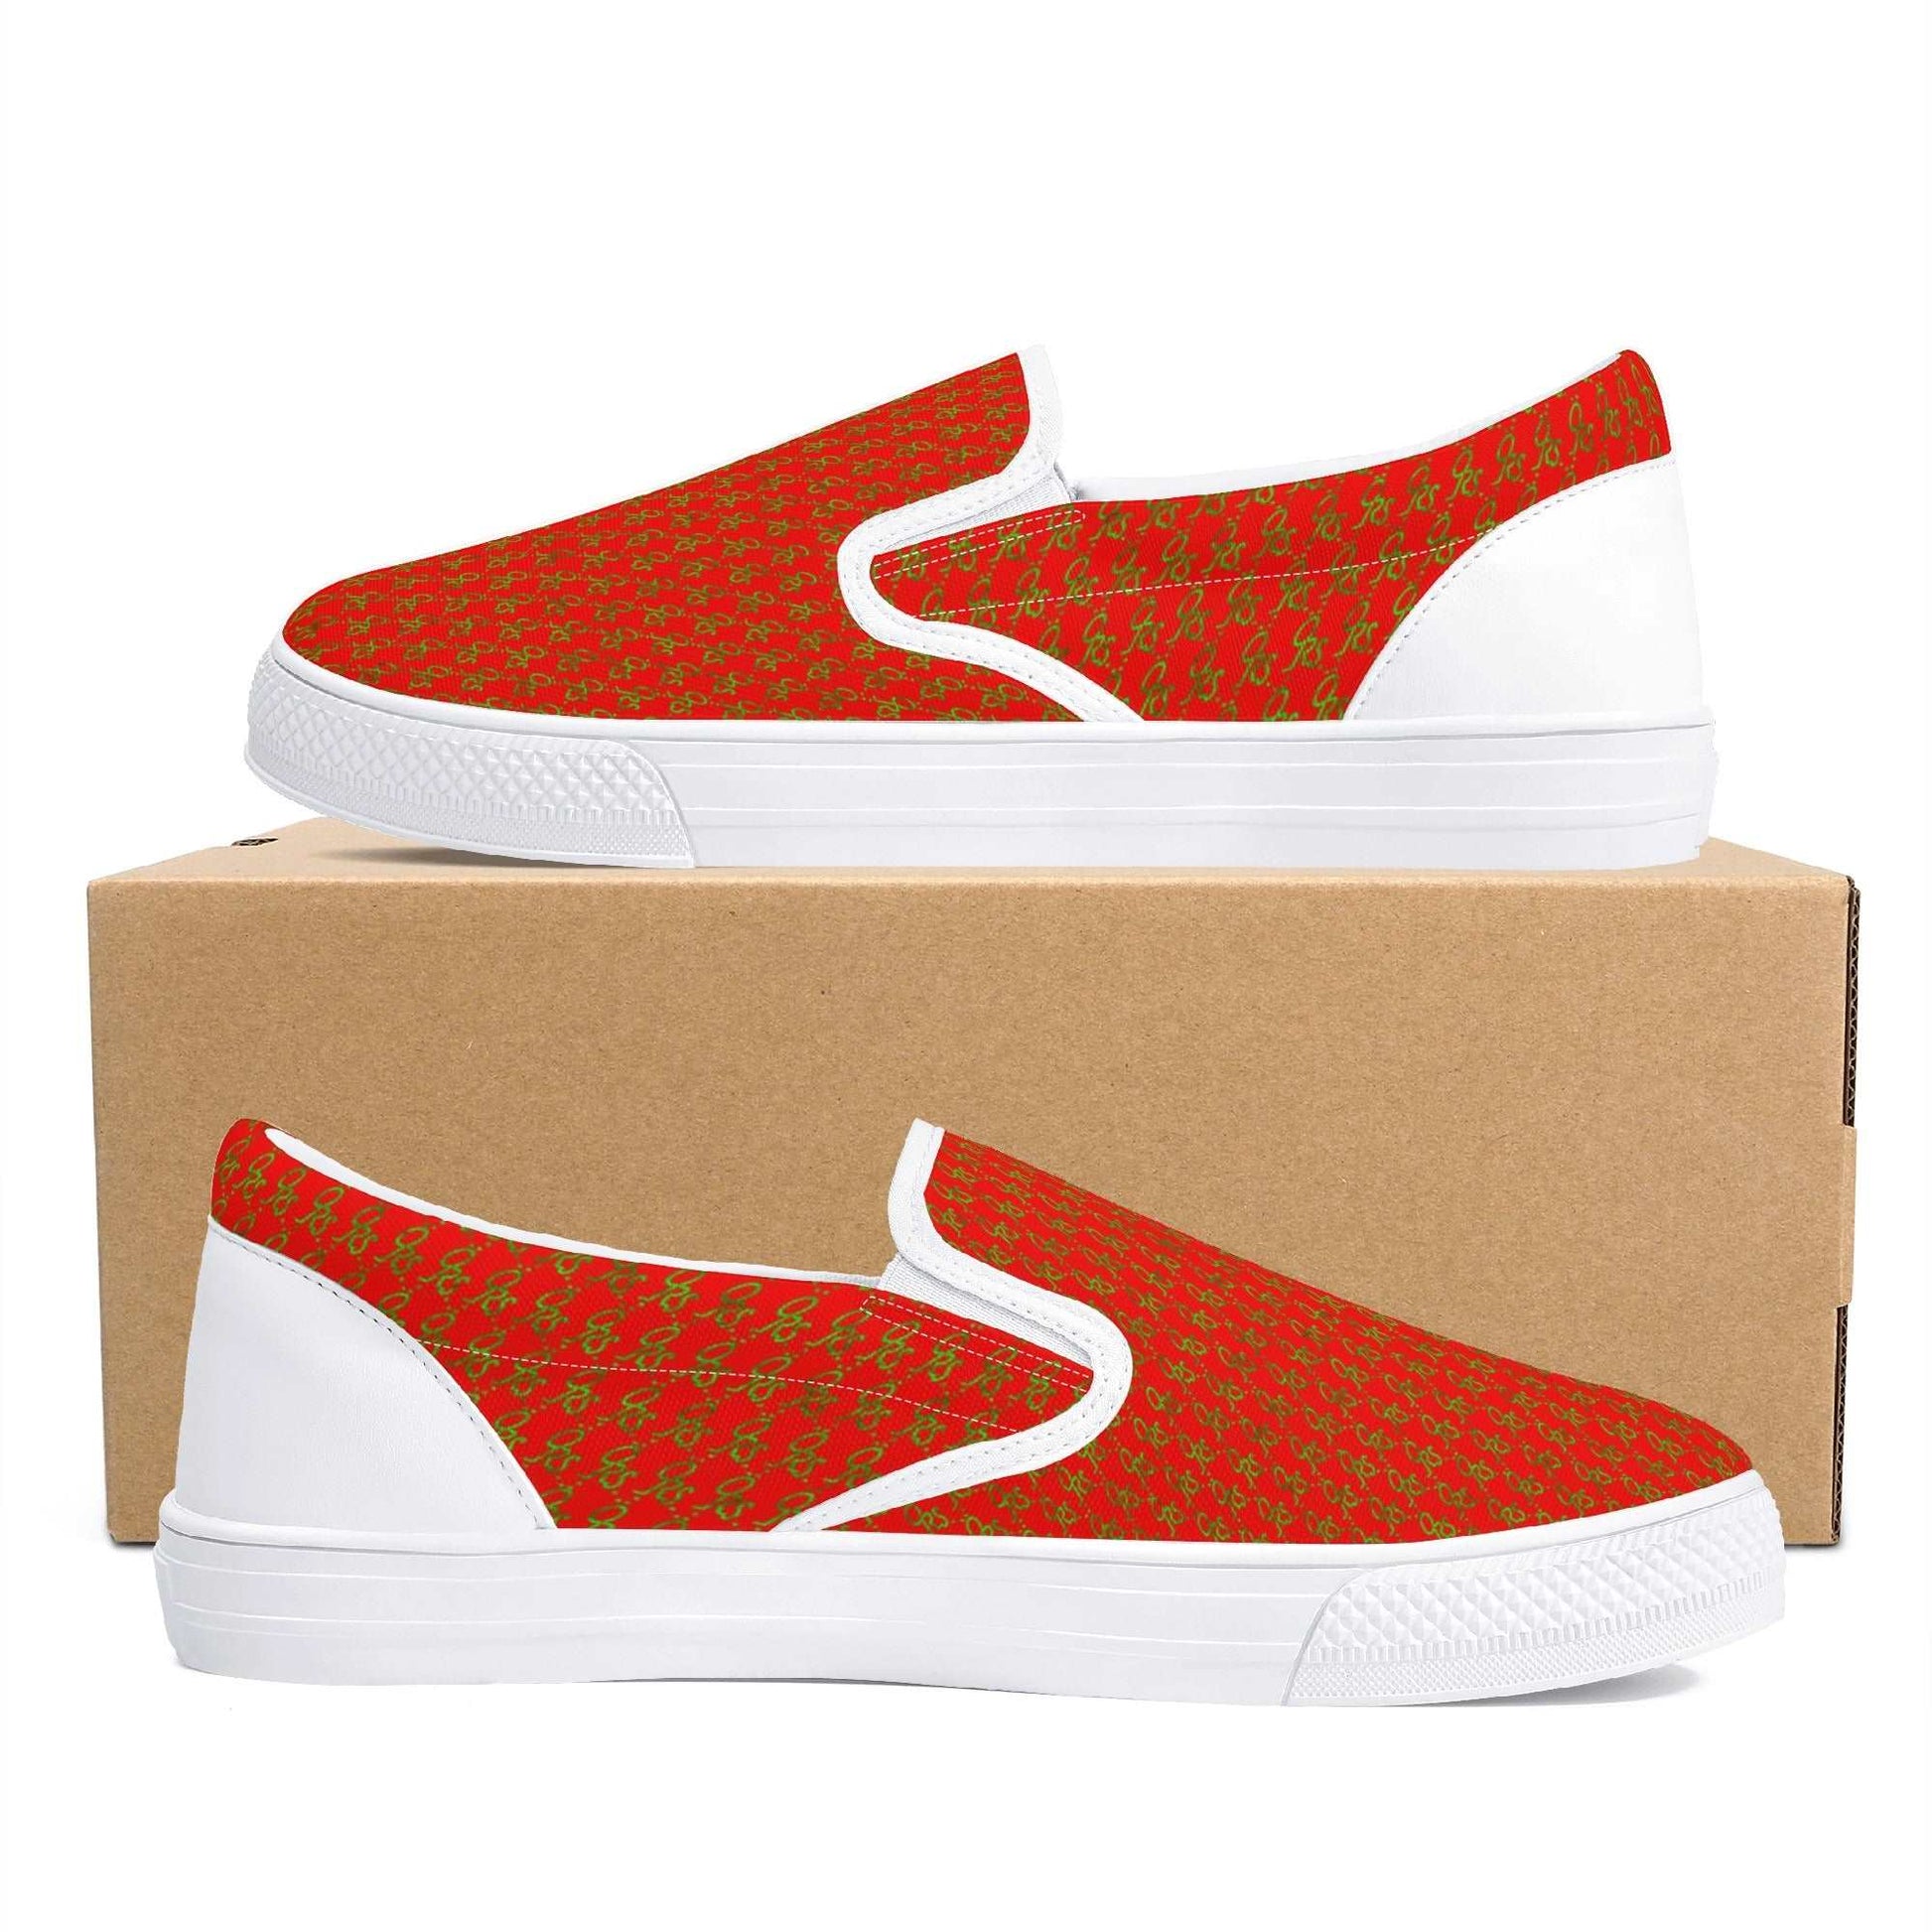 Men's Red ORS Slip On Shoes